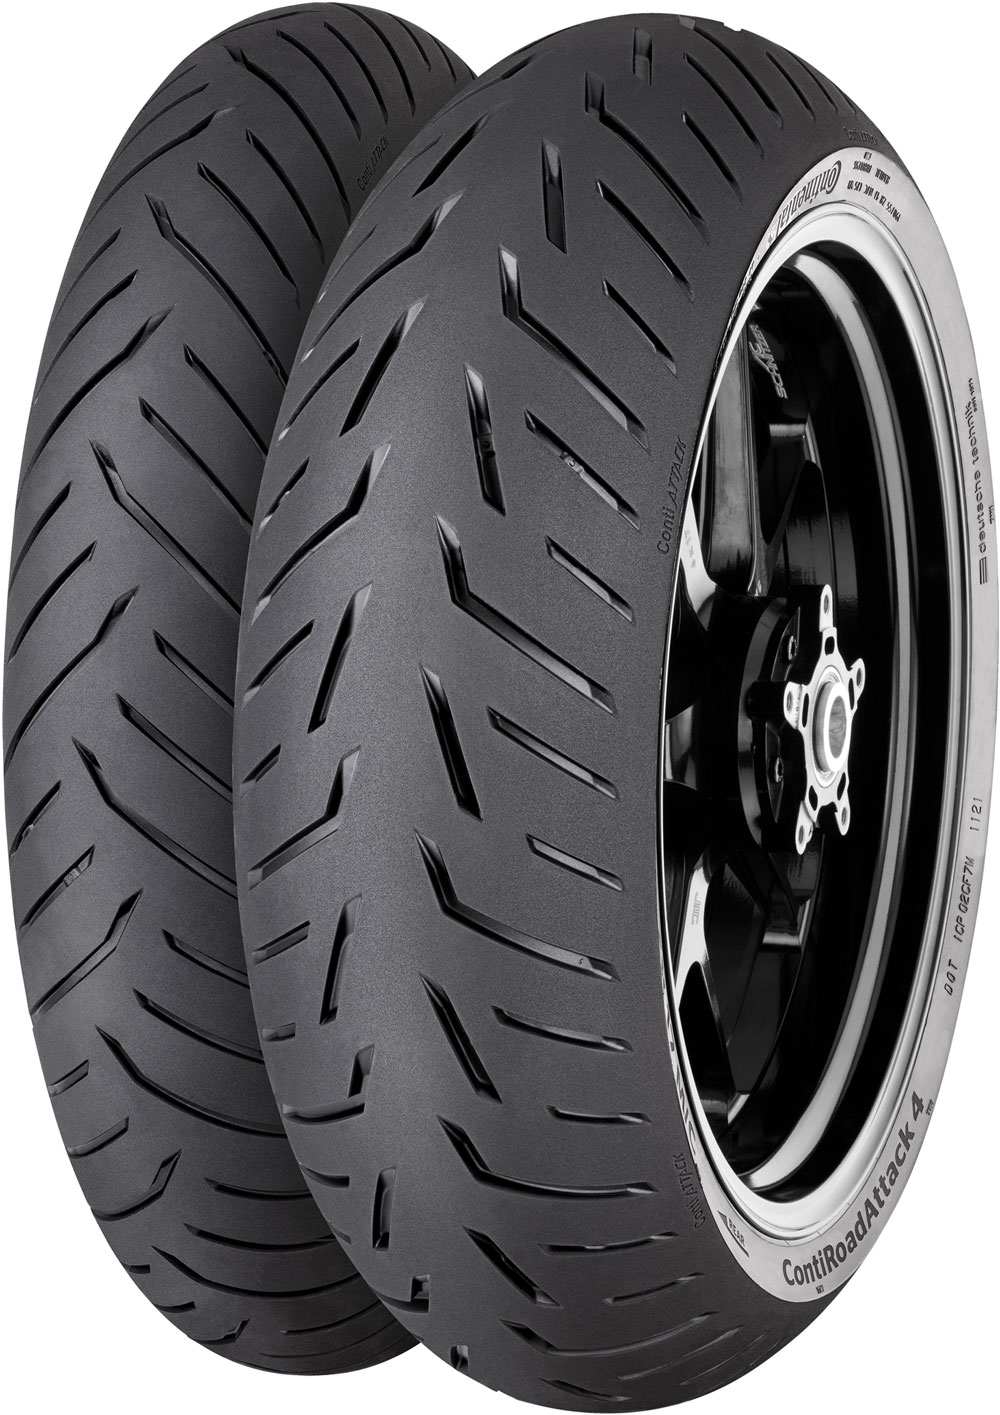 product_type-moto_tires CONTINENTAL RDATTACK4 180/55 R17 73W